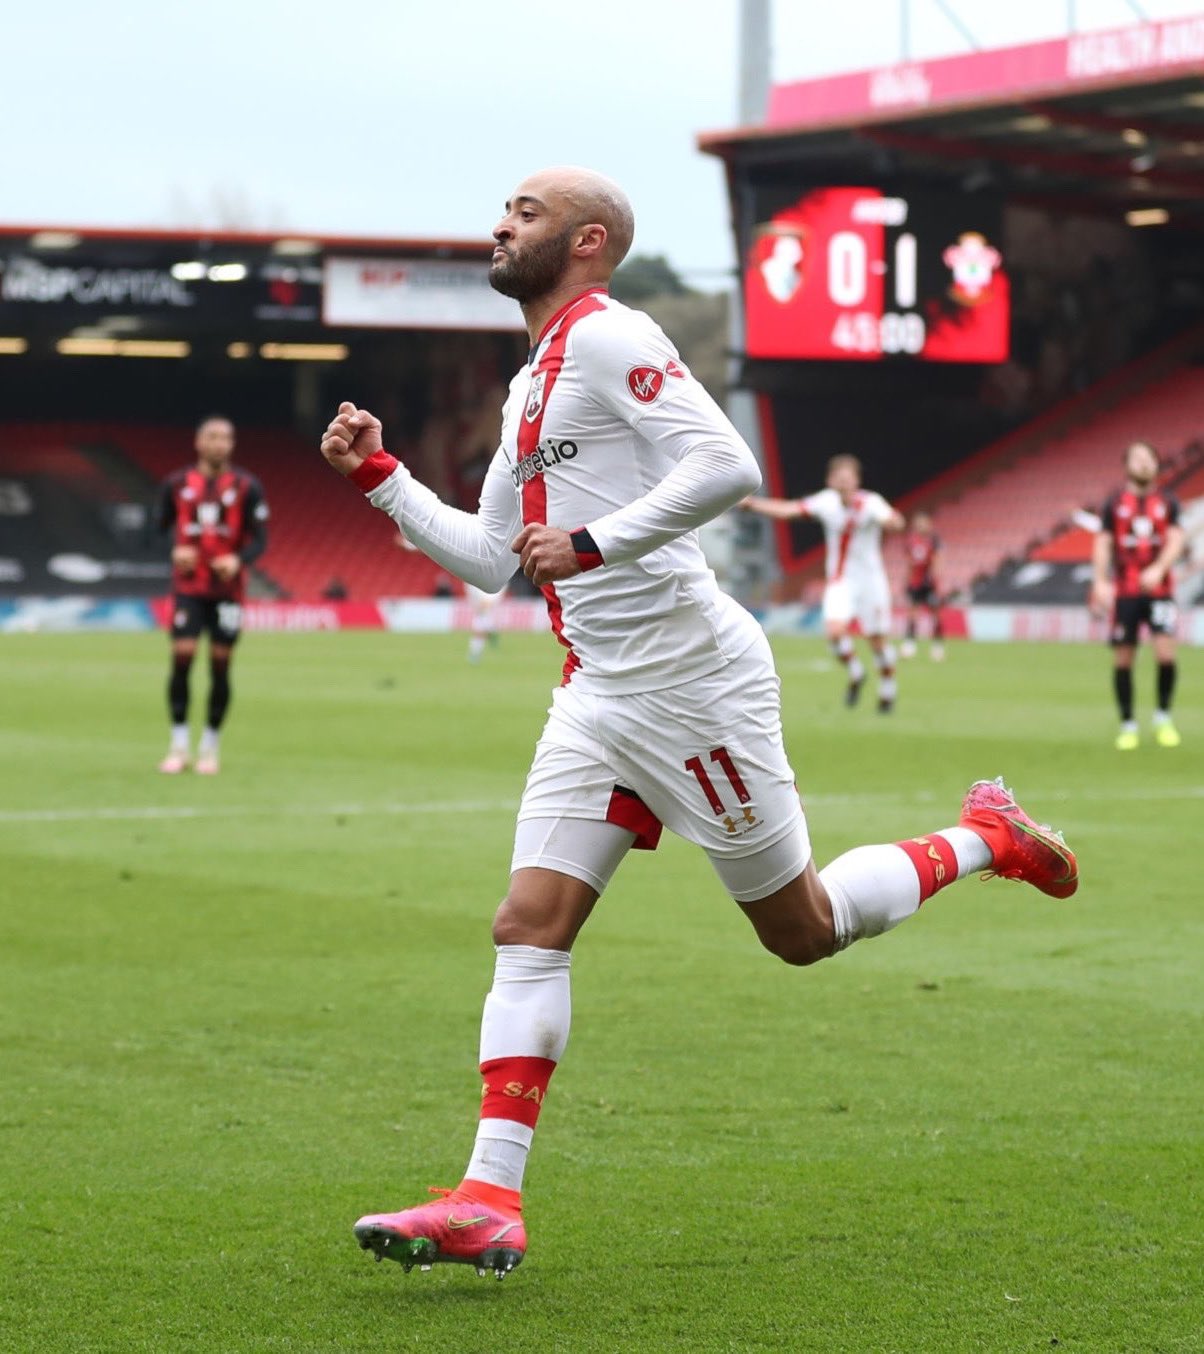 FA Cup Quarter-Final fixture between Bournemouth and Southampton - Redmond celebrates his first